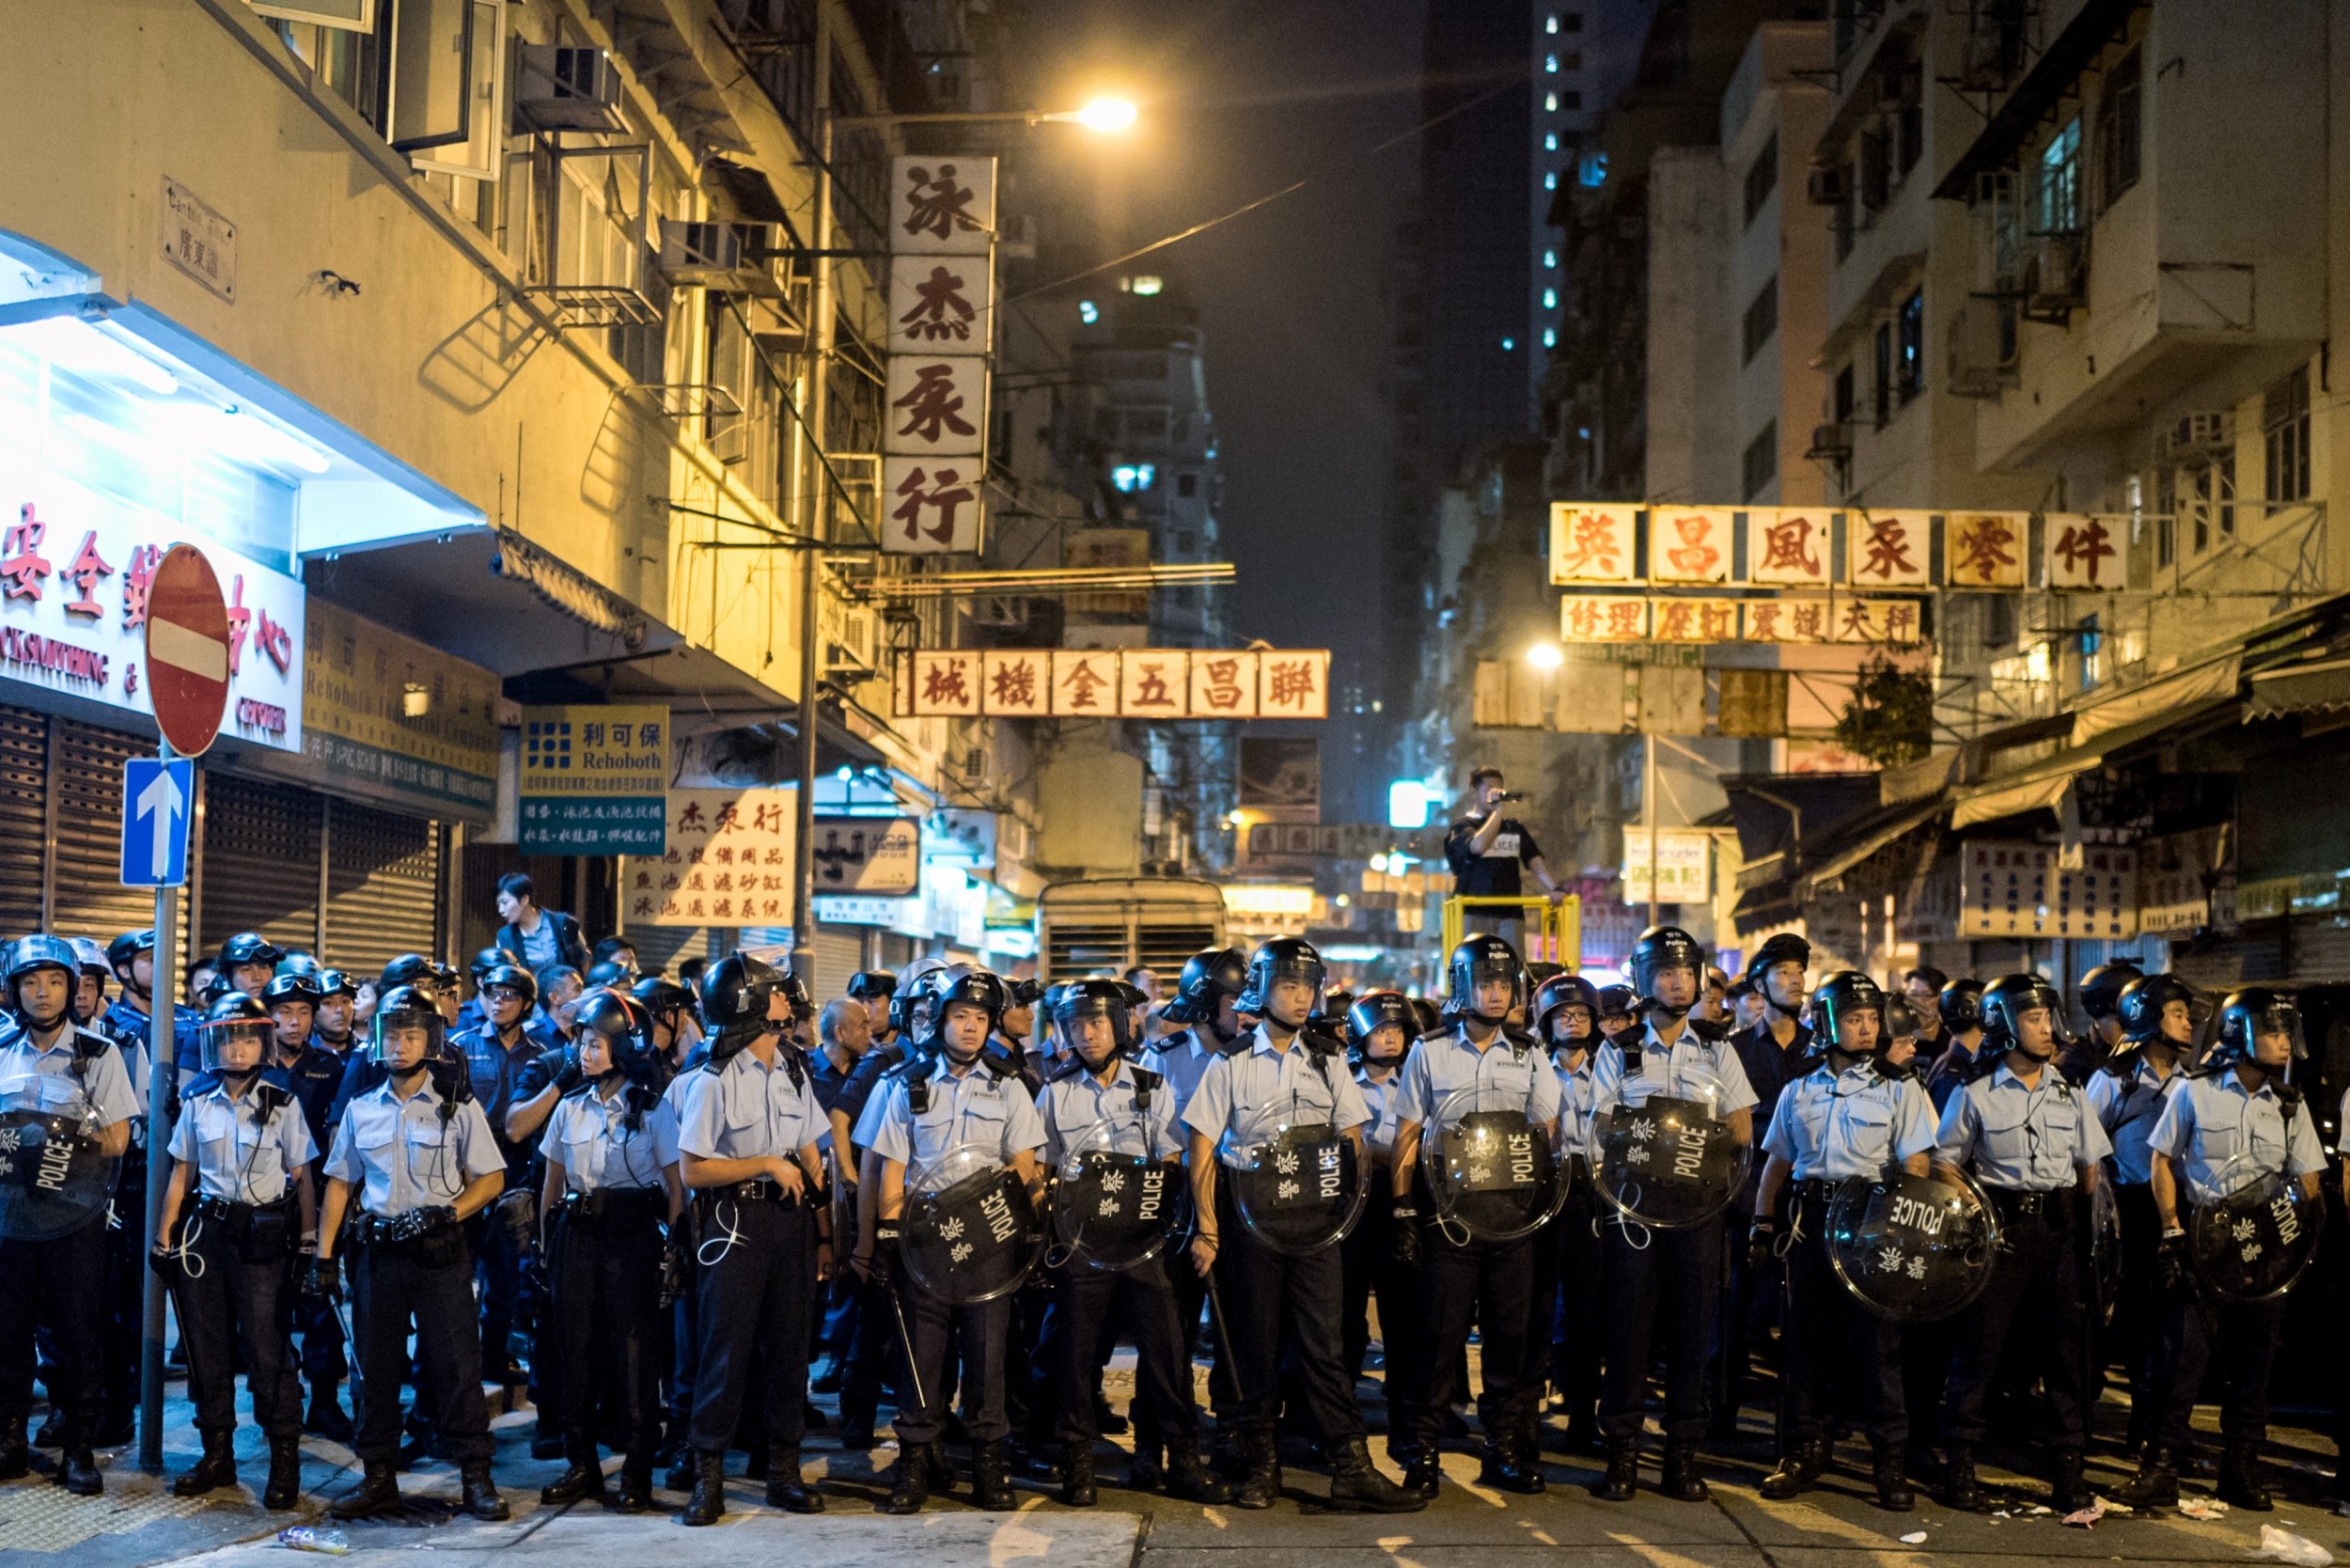 Photos: Clashes in Hong Kong As Police Clear Protest Site